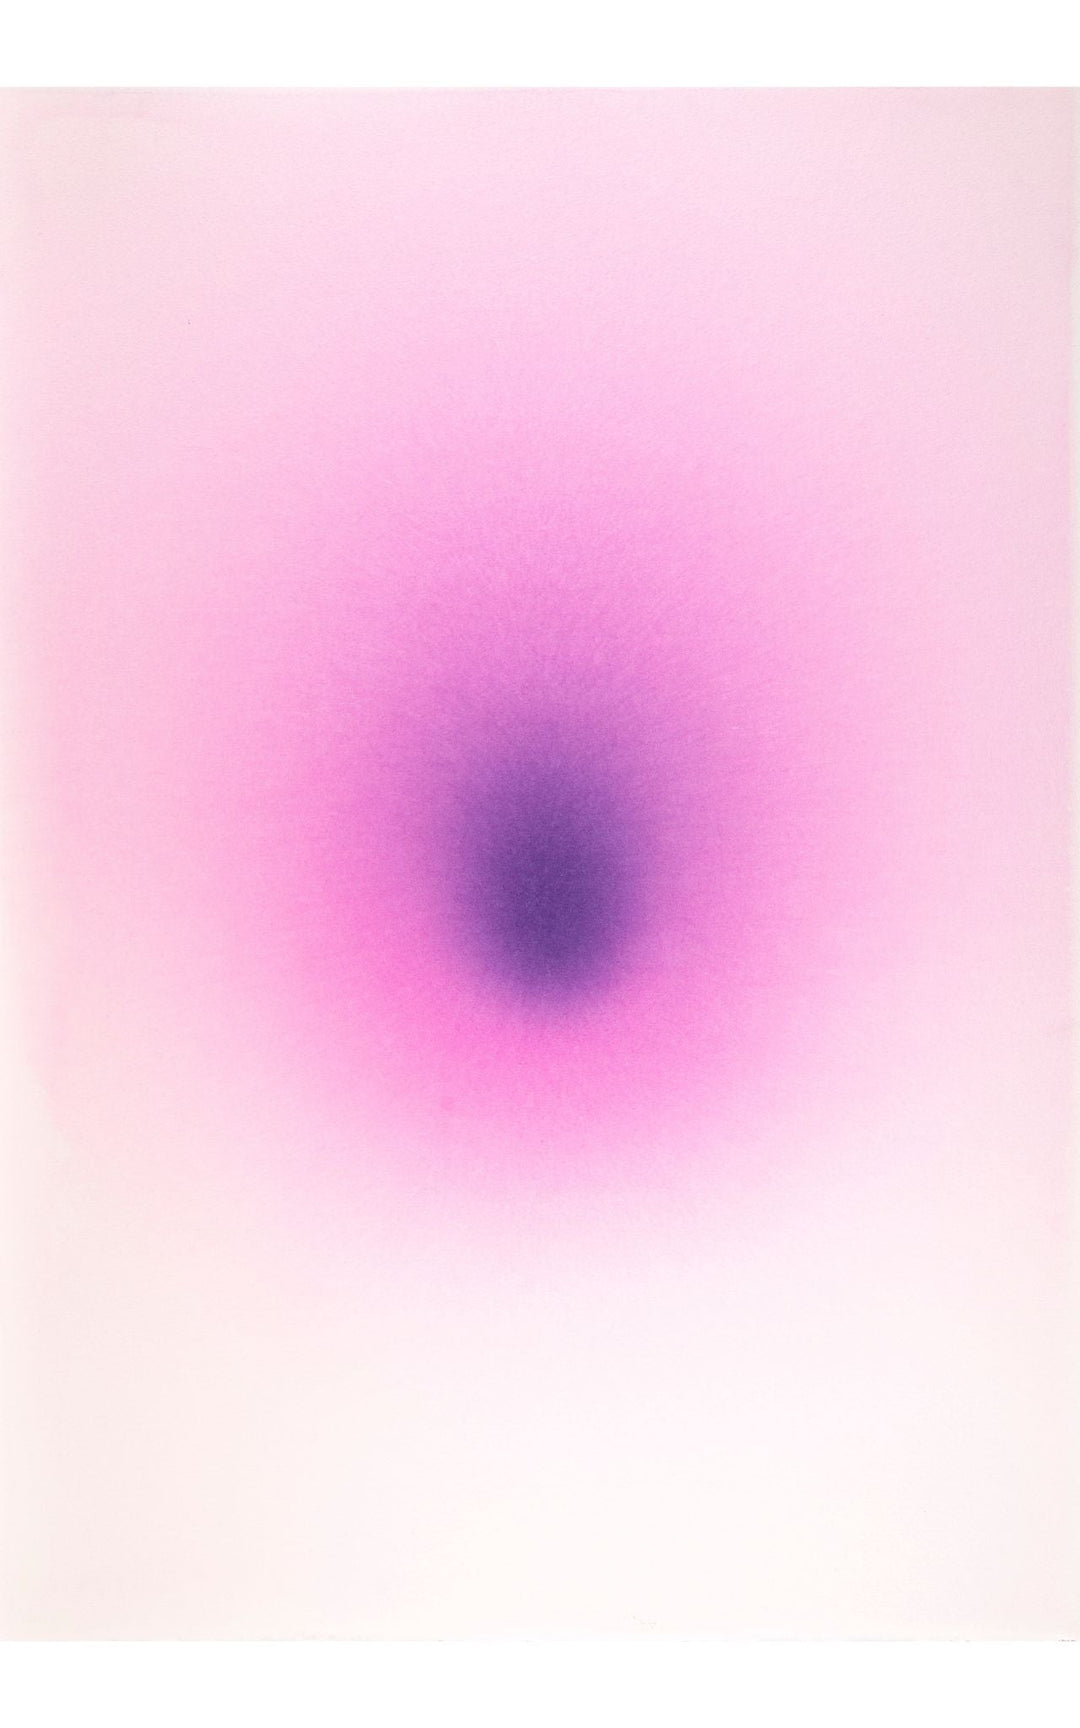 minimalist composition with intense magenta color in the center fading outward in diluted hues